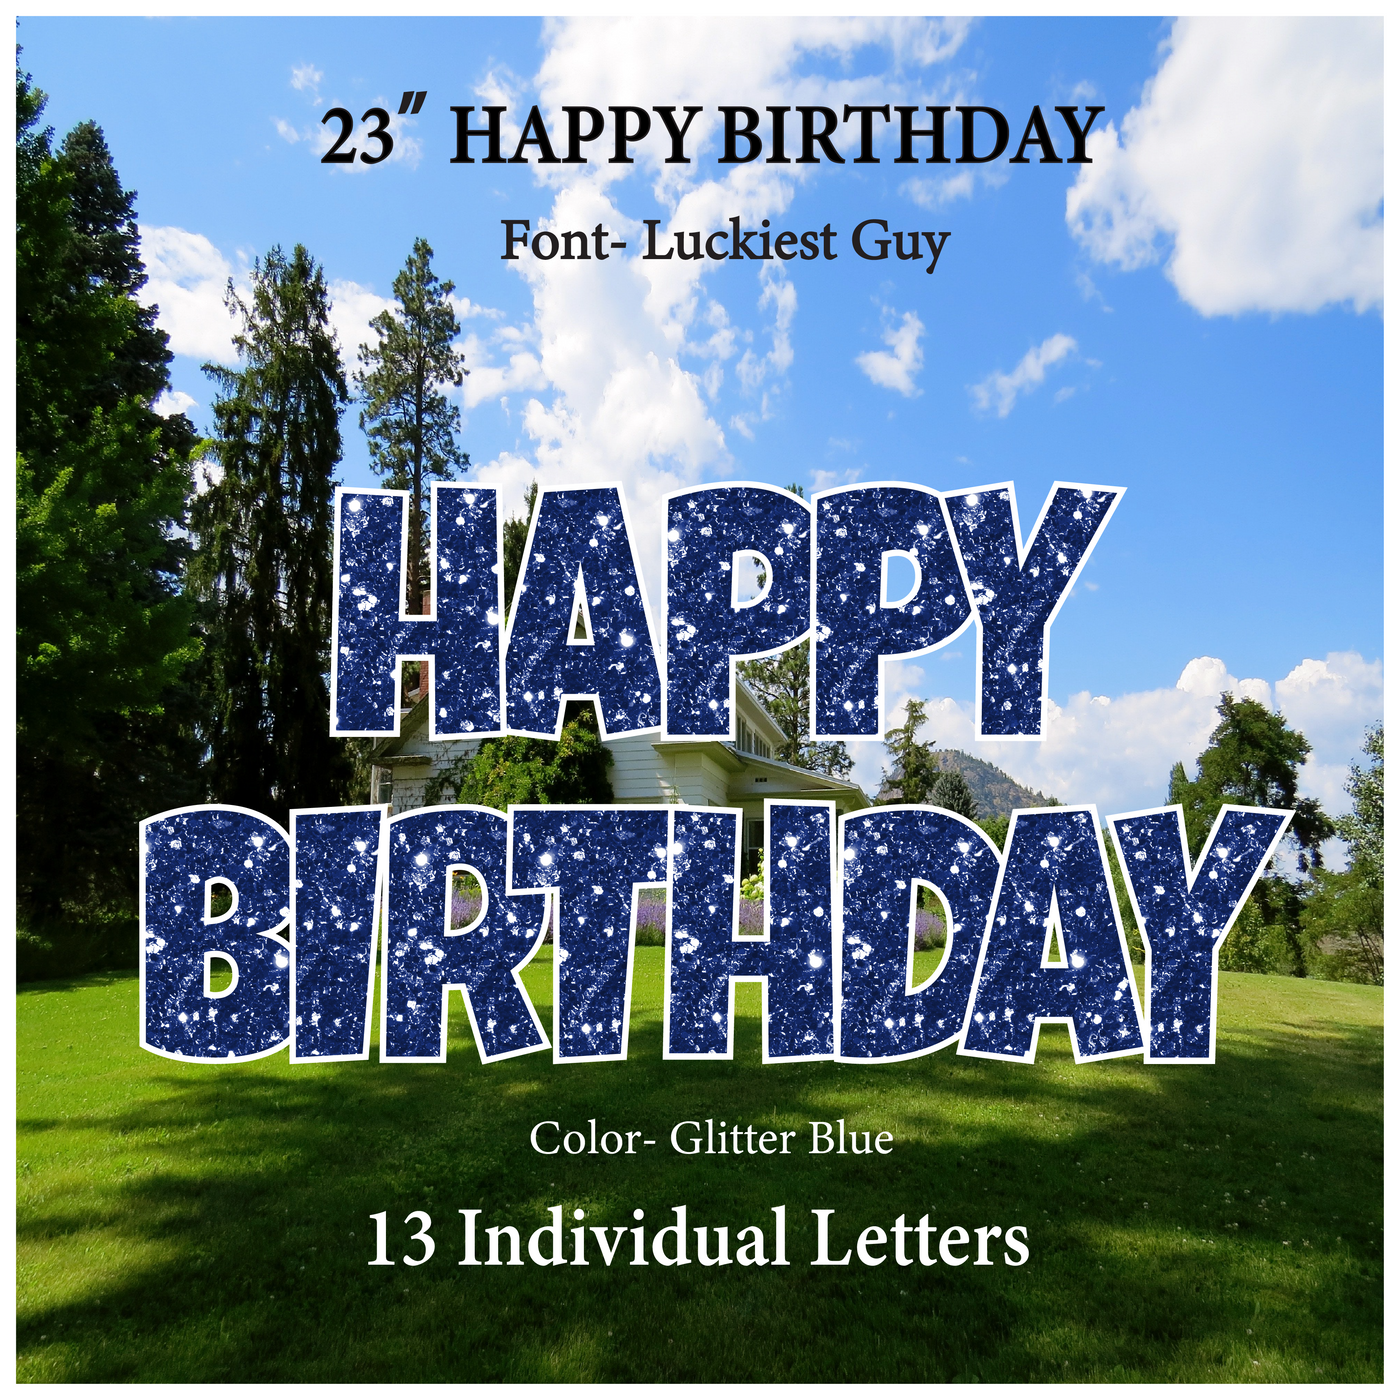 Glitter Blue 23''HAPPY BIRTHDAY Including 13 Individual Letters